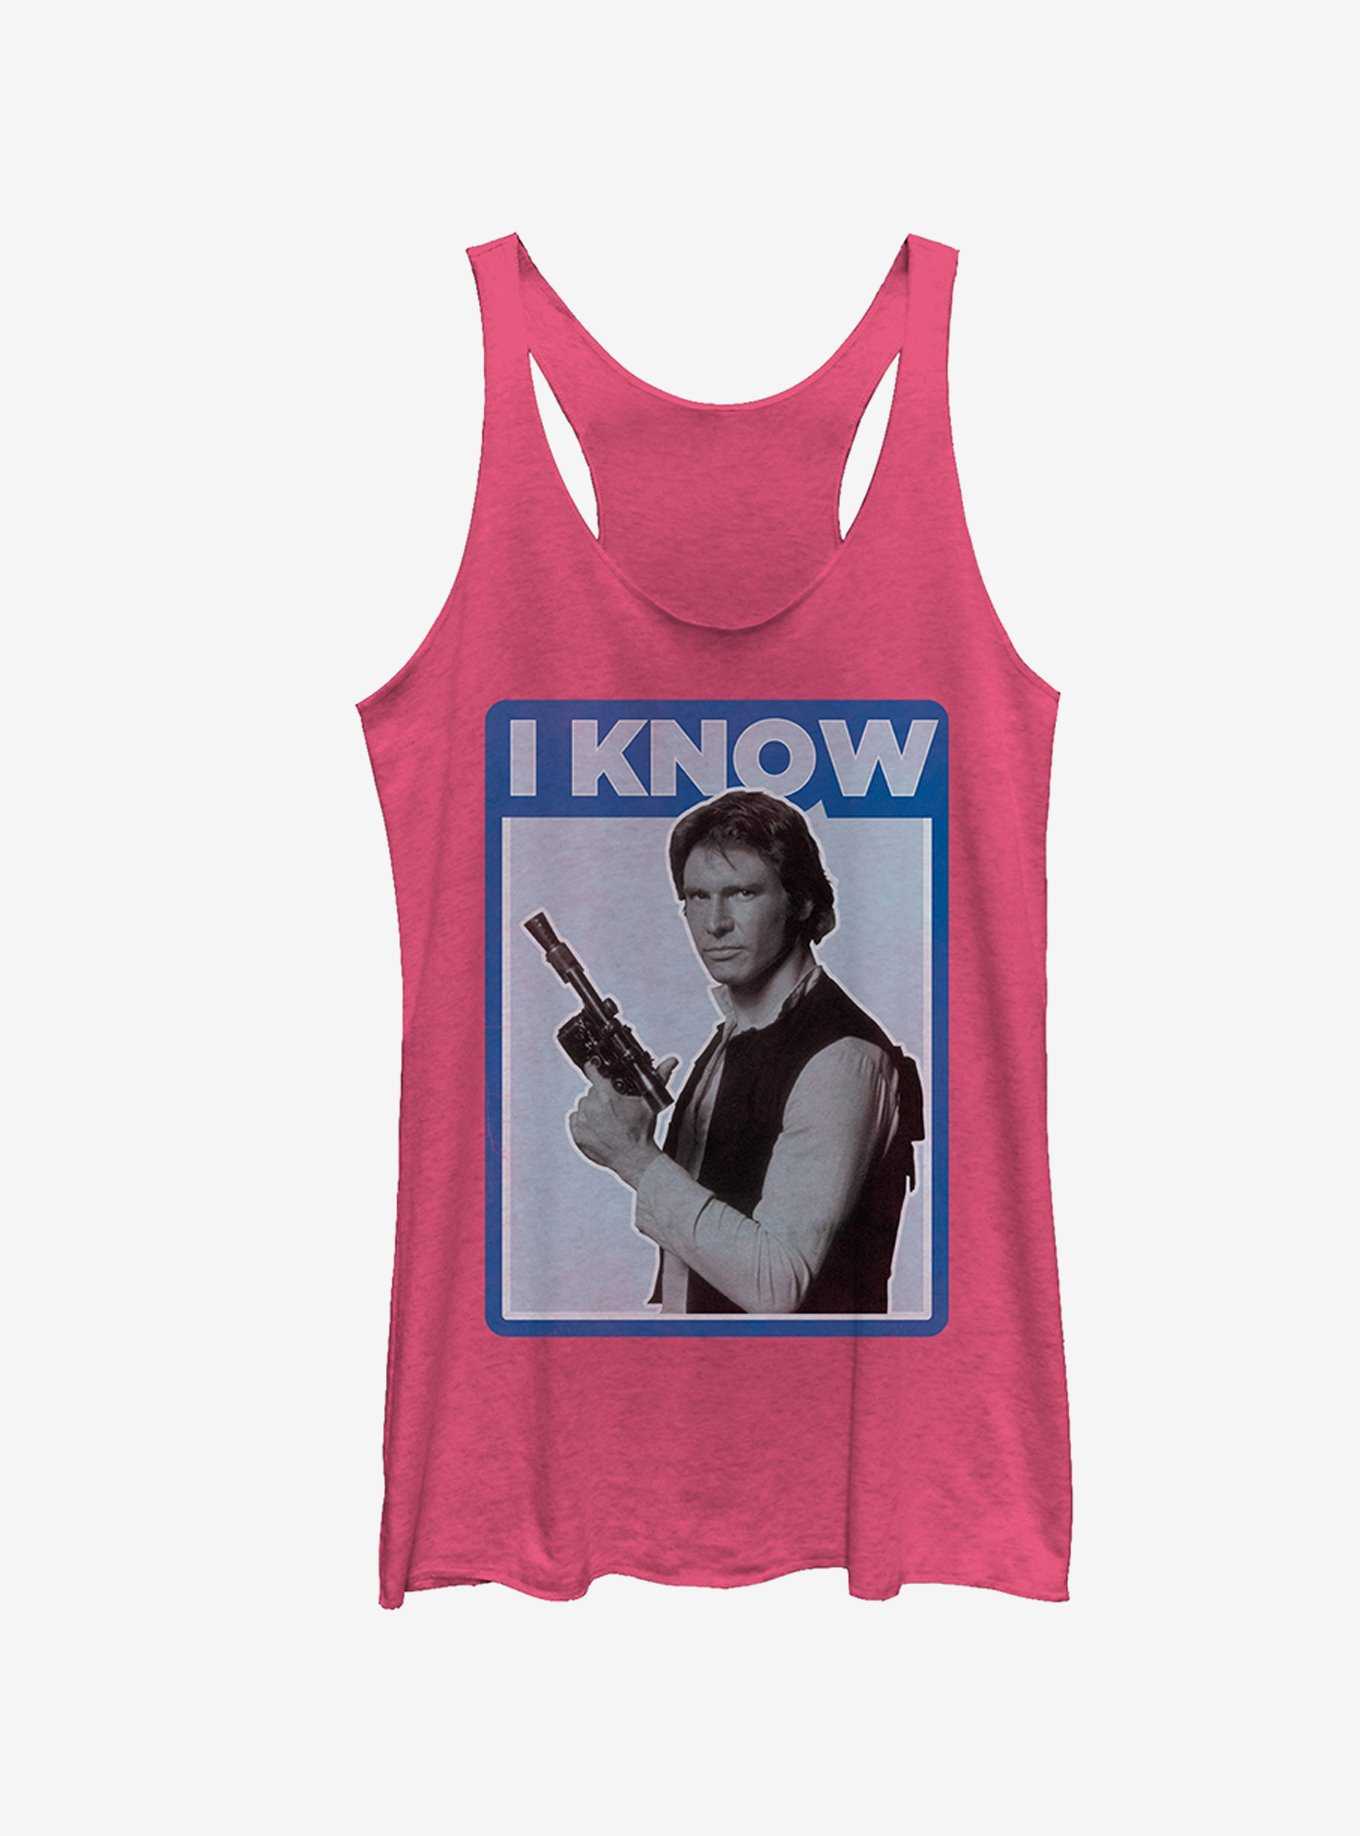 Star Wars Han Solo Quote I Know Girls Tanks, , hi-res